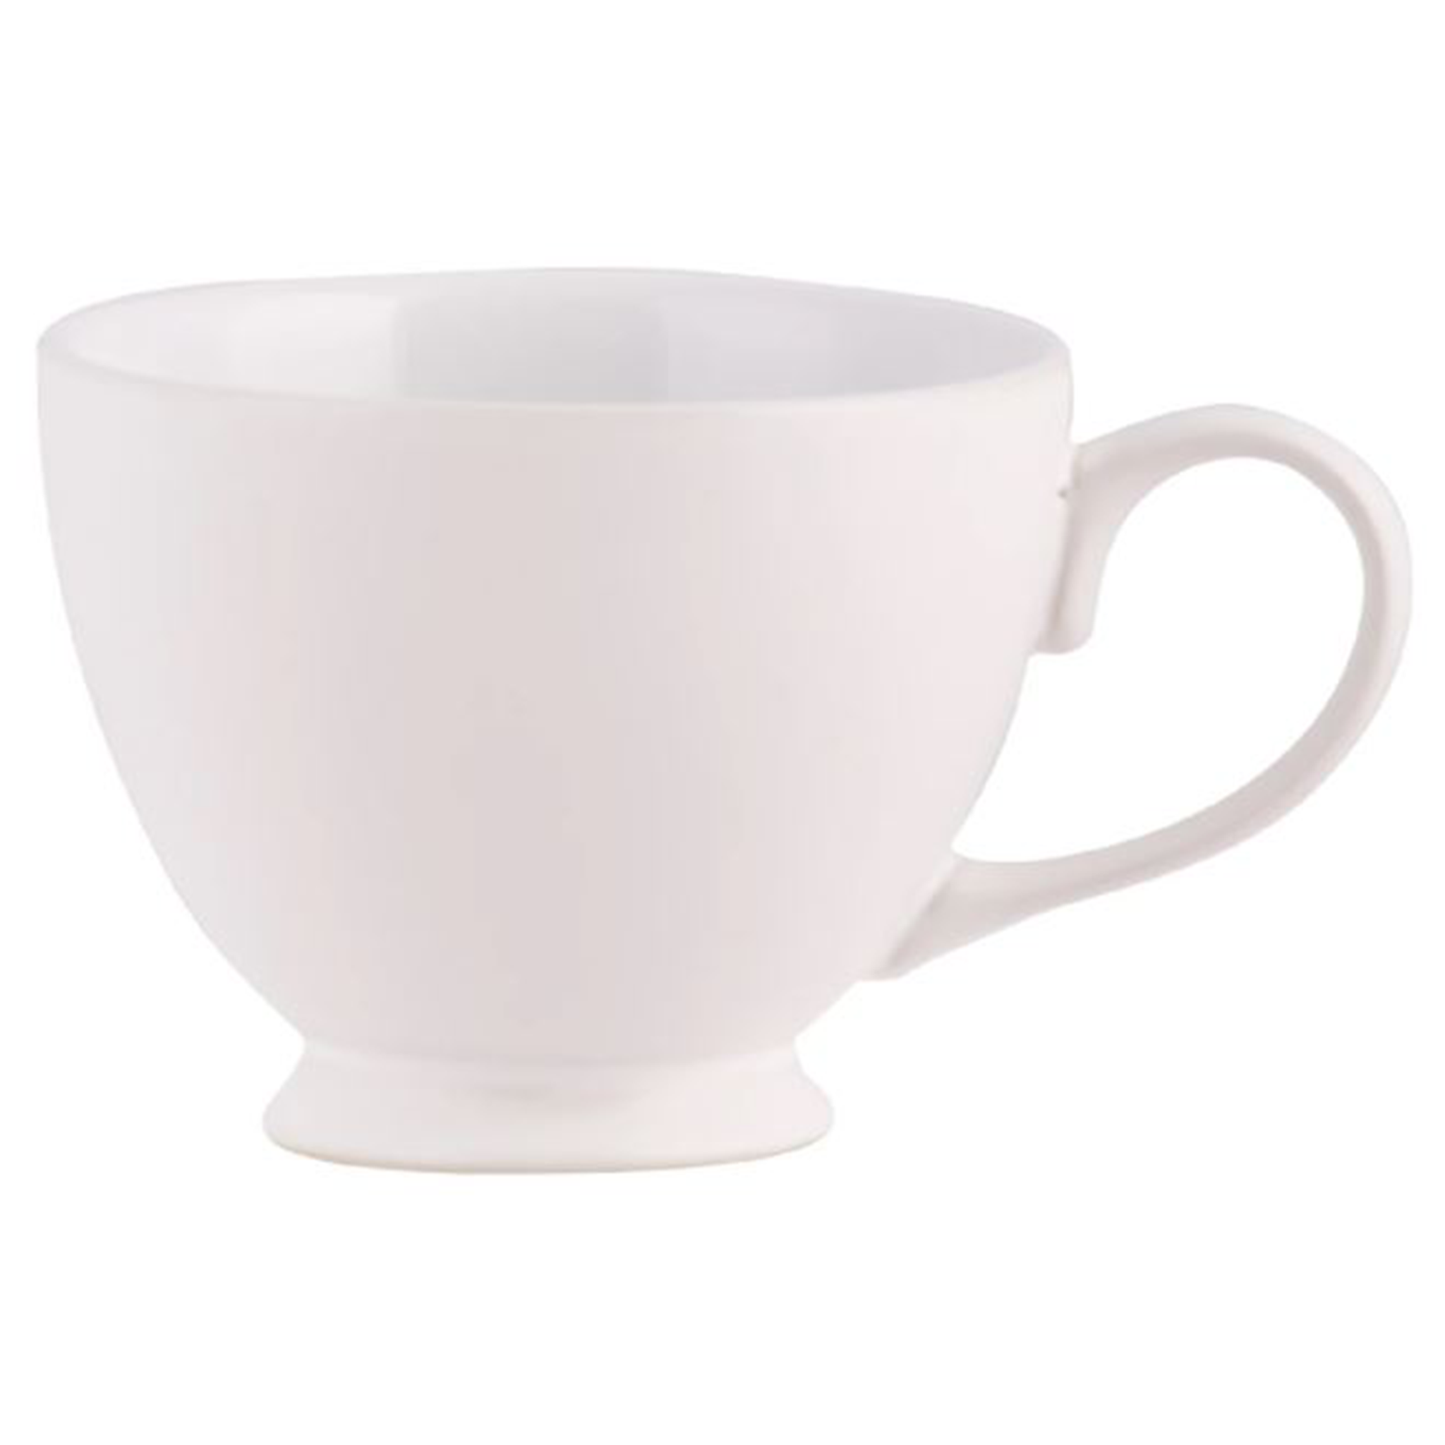 a large white stoneware tea cup